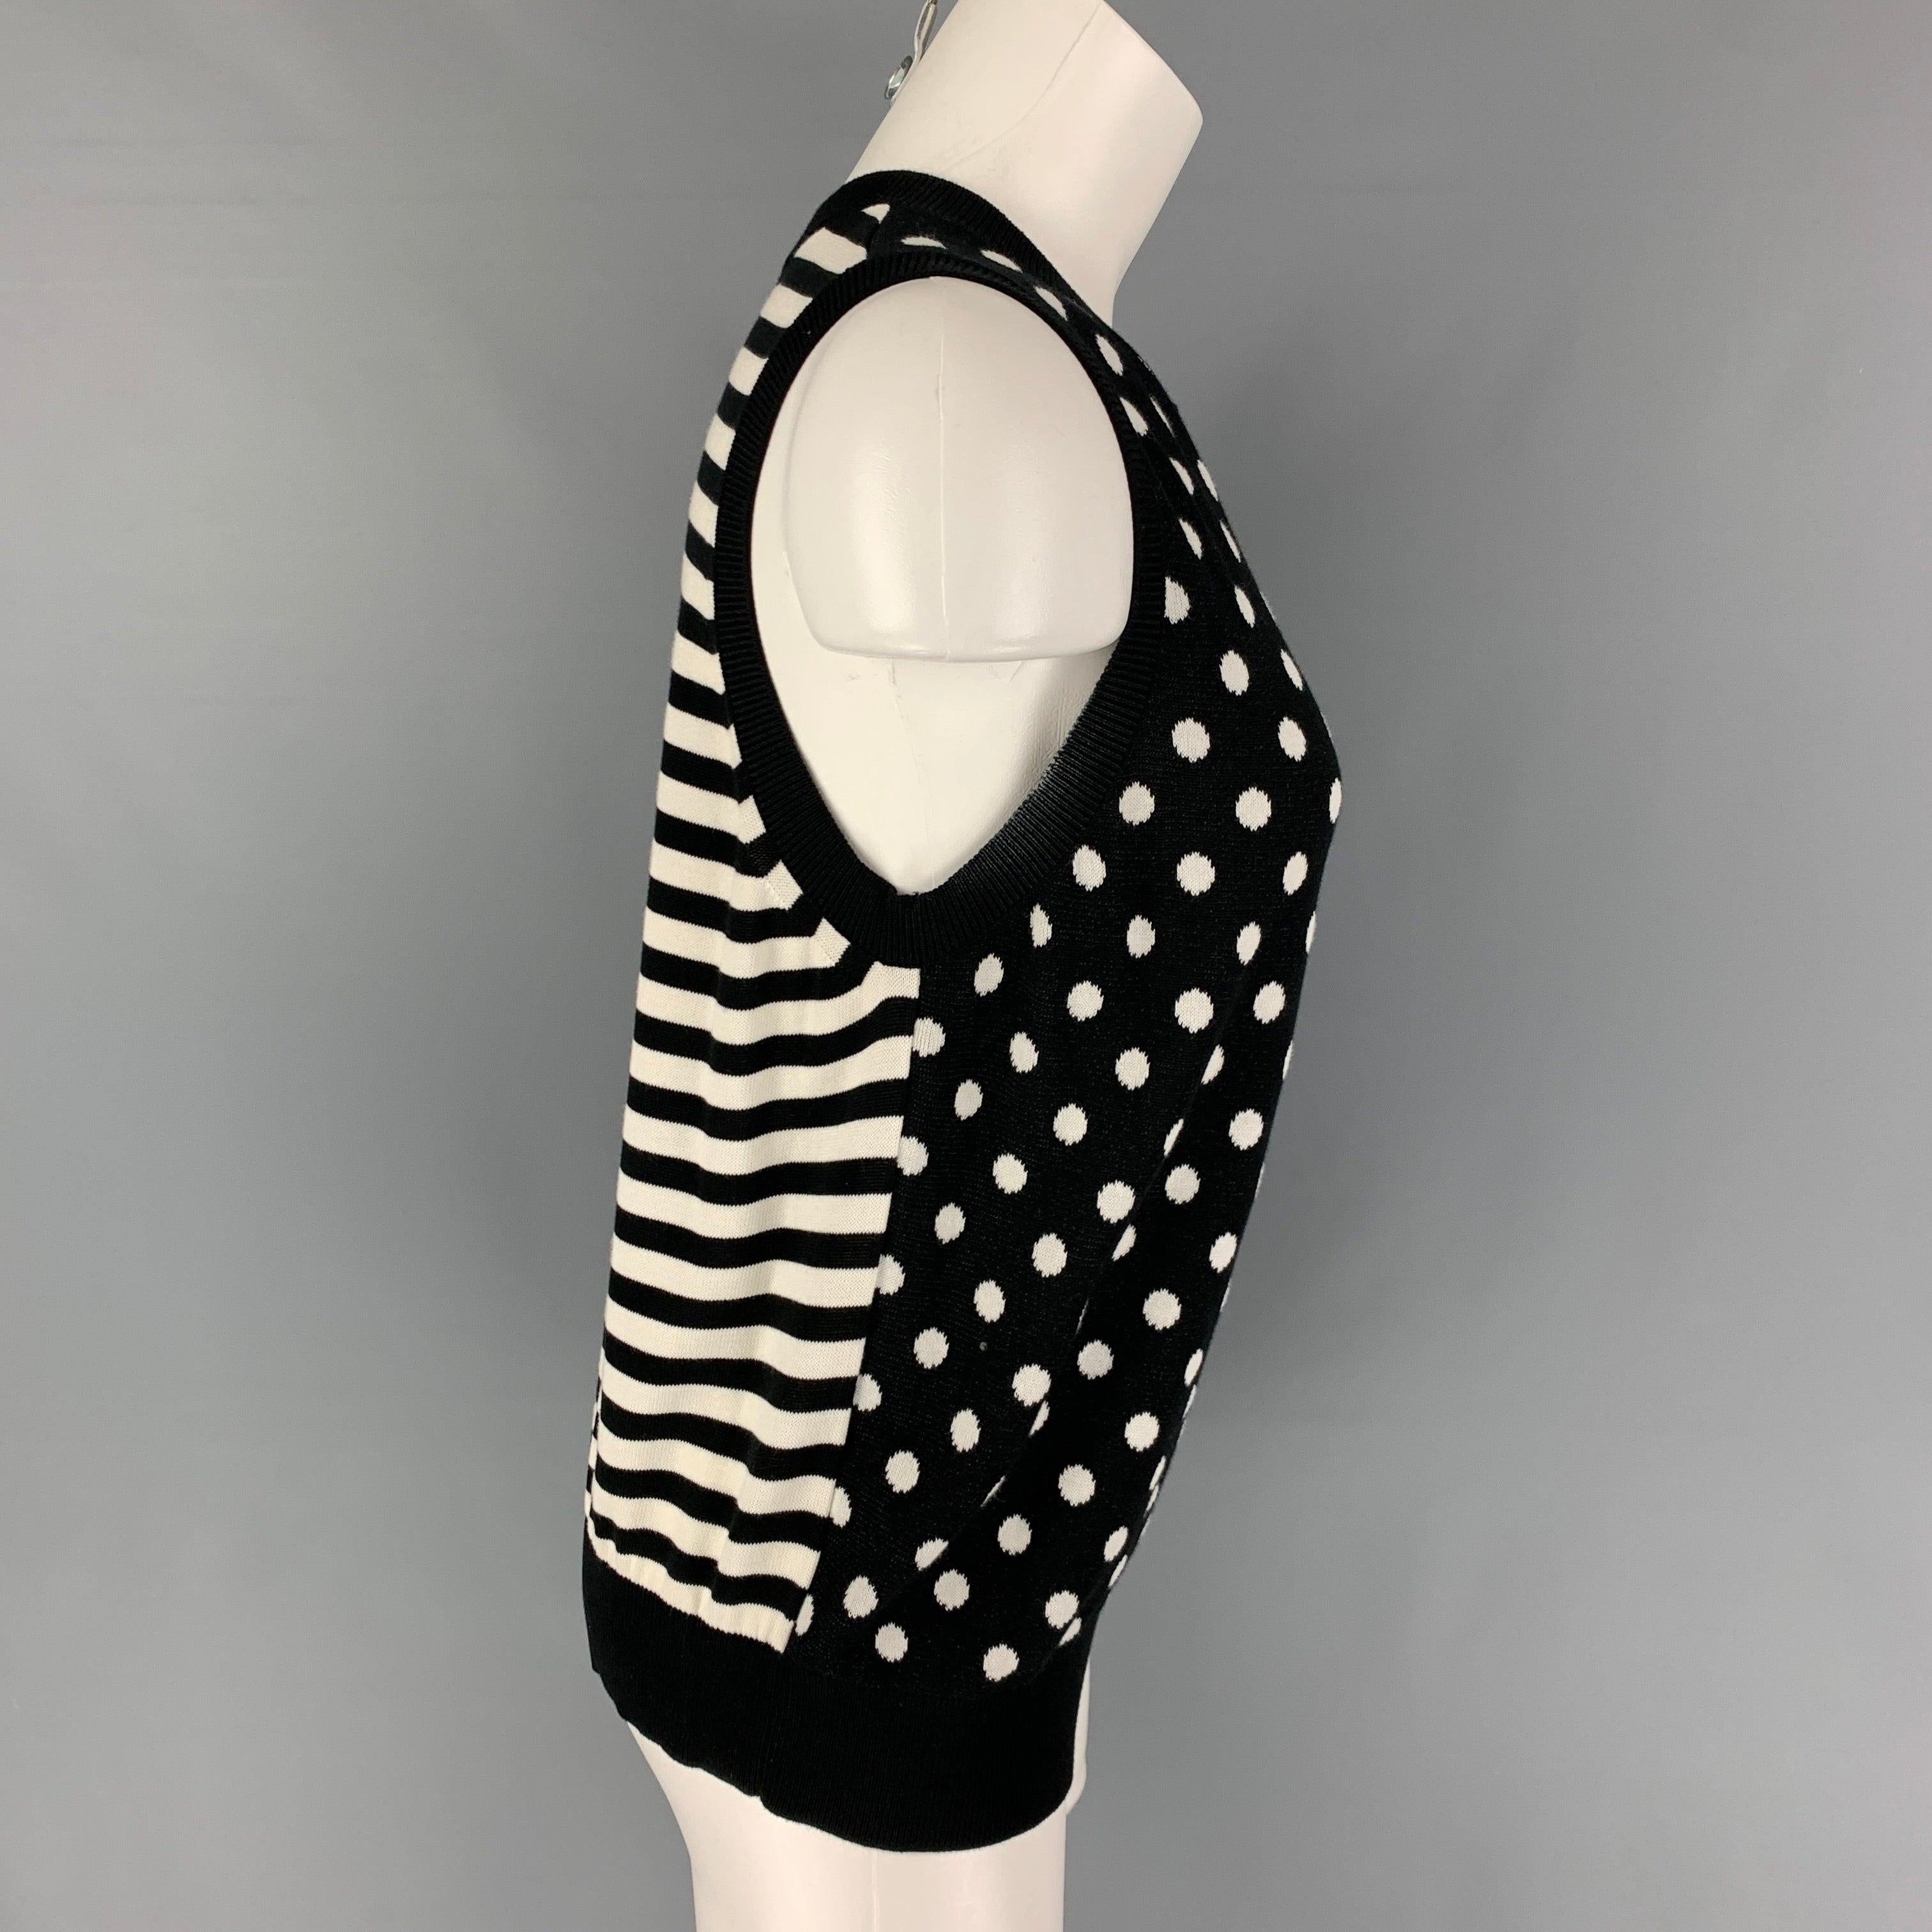 MARC JACOBS vest comes in a black & white mixed print cotton blend featuring a ribbed hem.
Very Good
Pre-Owned Condition. 

Marked:   L/G 

Measurements: 
 
Shoulder: 13.5 inches  Bust: 36 inches  Length: 22.5 inches 
  
  
 
Reference: